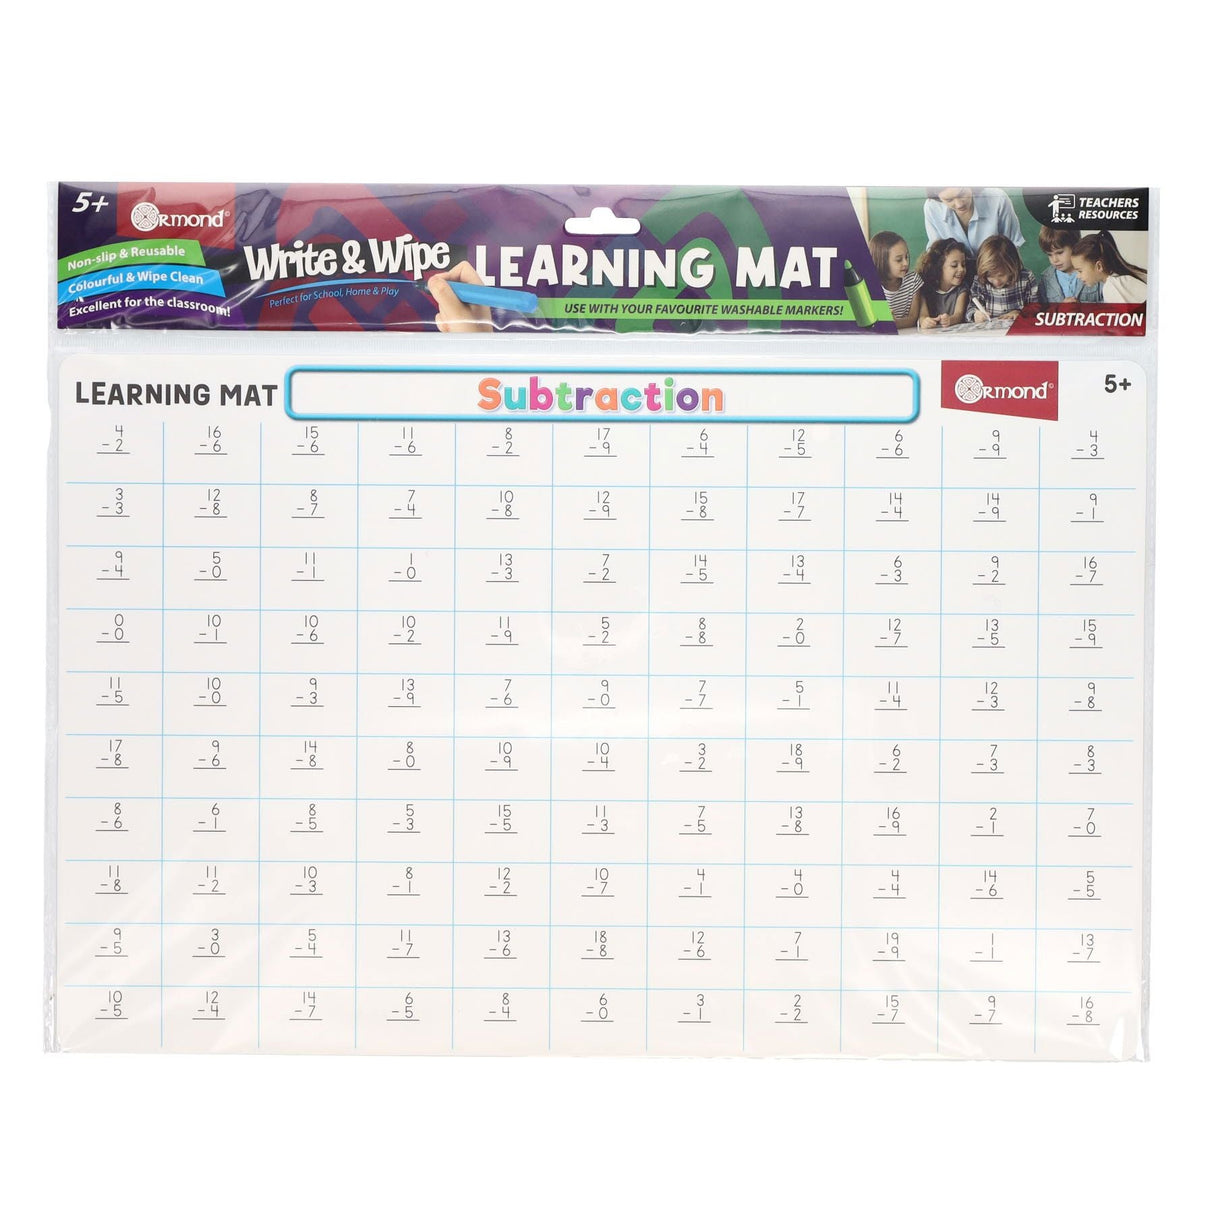 Ormond Learning Mat - Subtraction | Stationery Shop UK